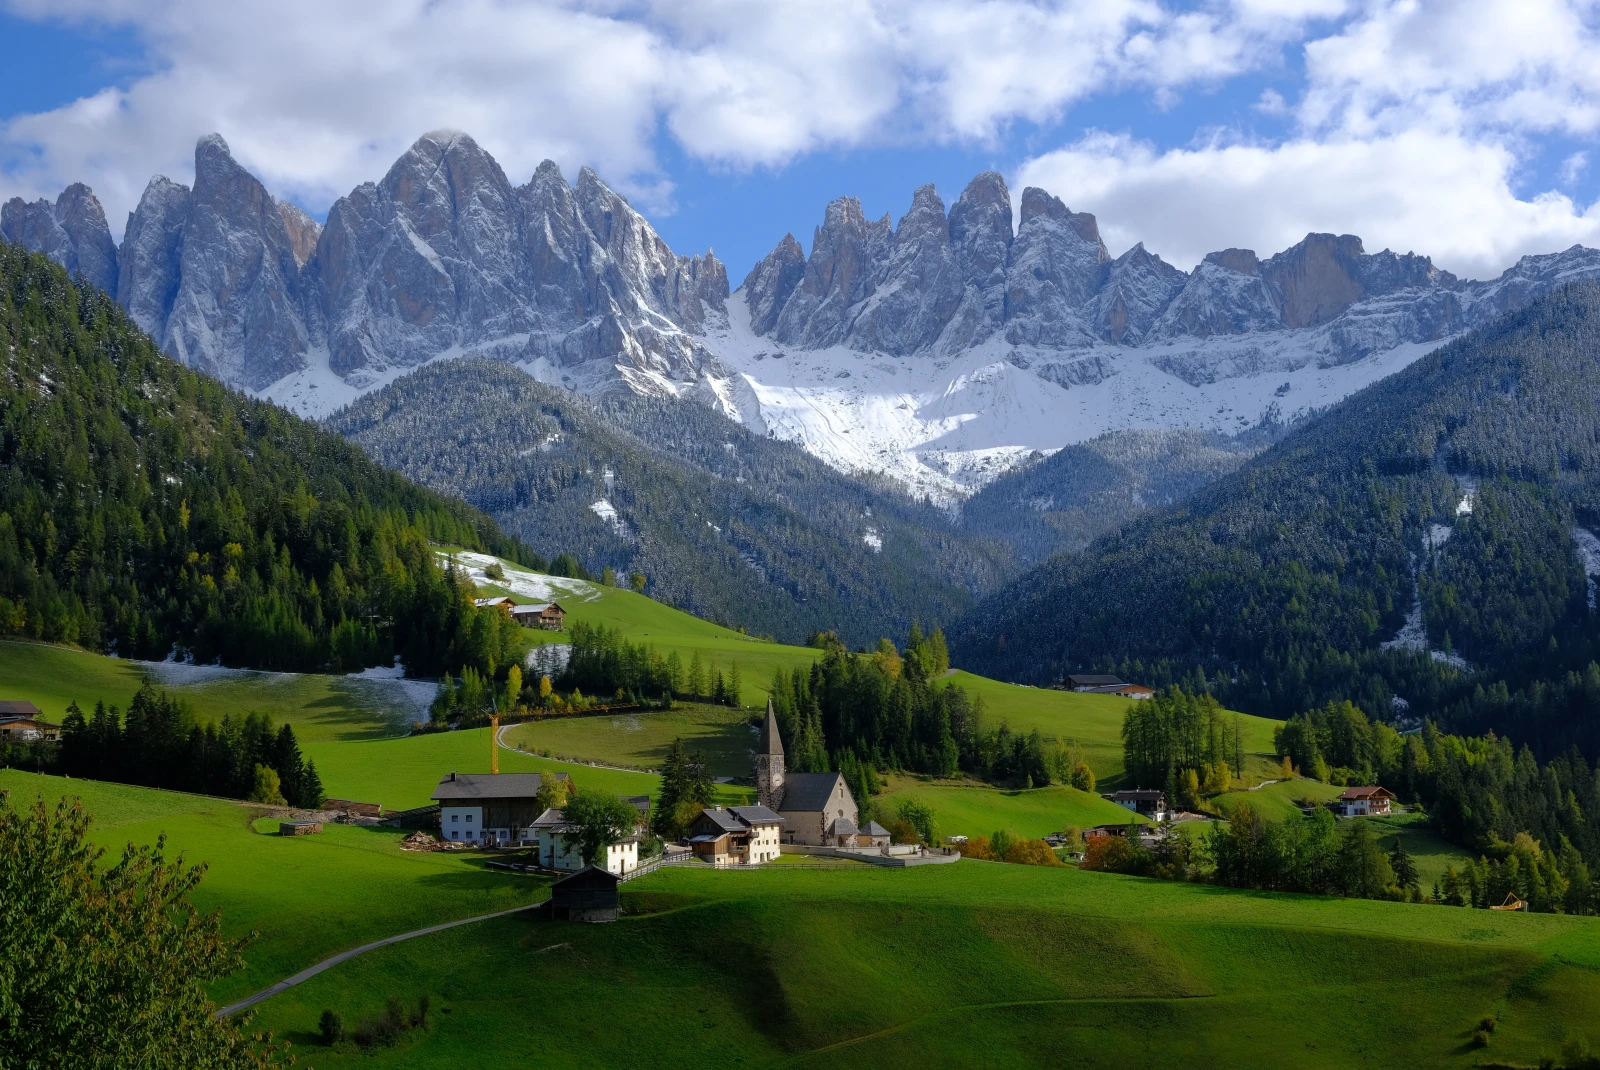 Dolomites mountains and valley with a wooden house. 